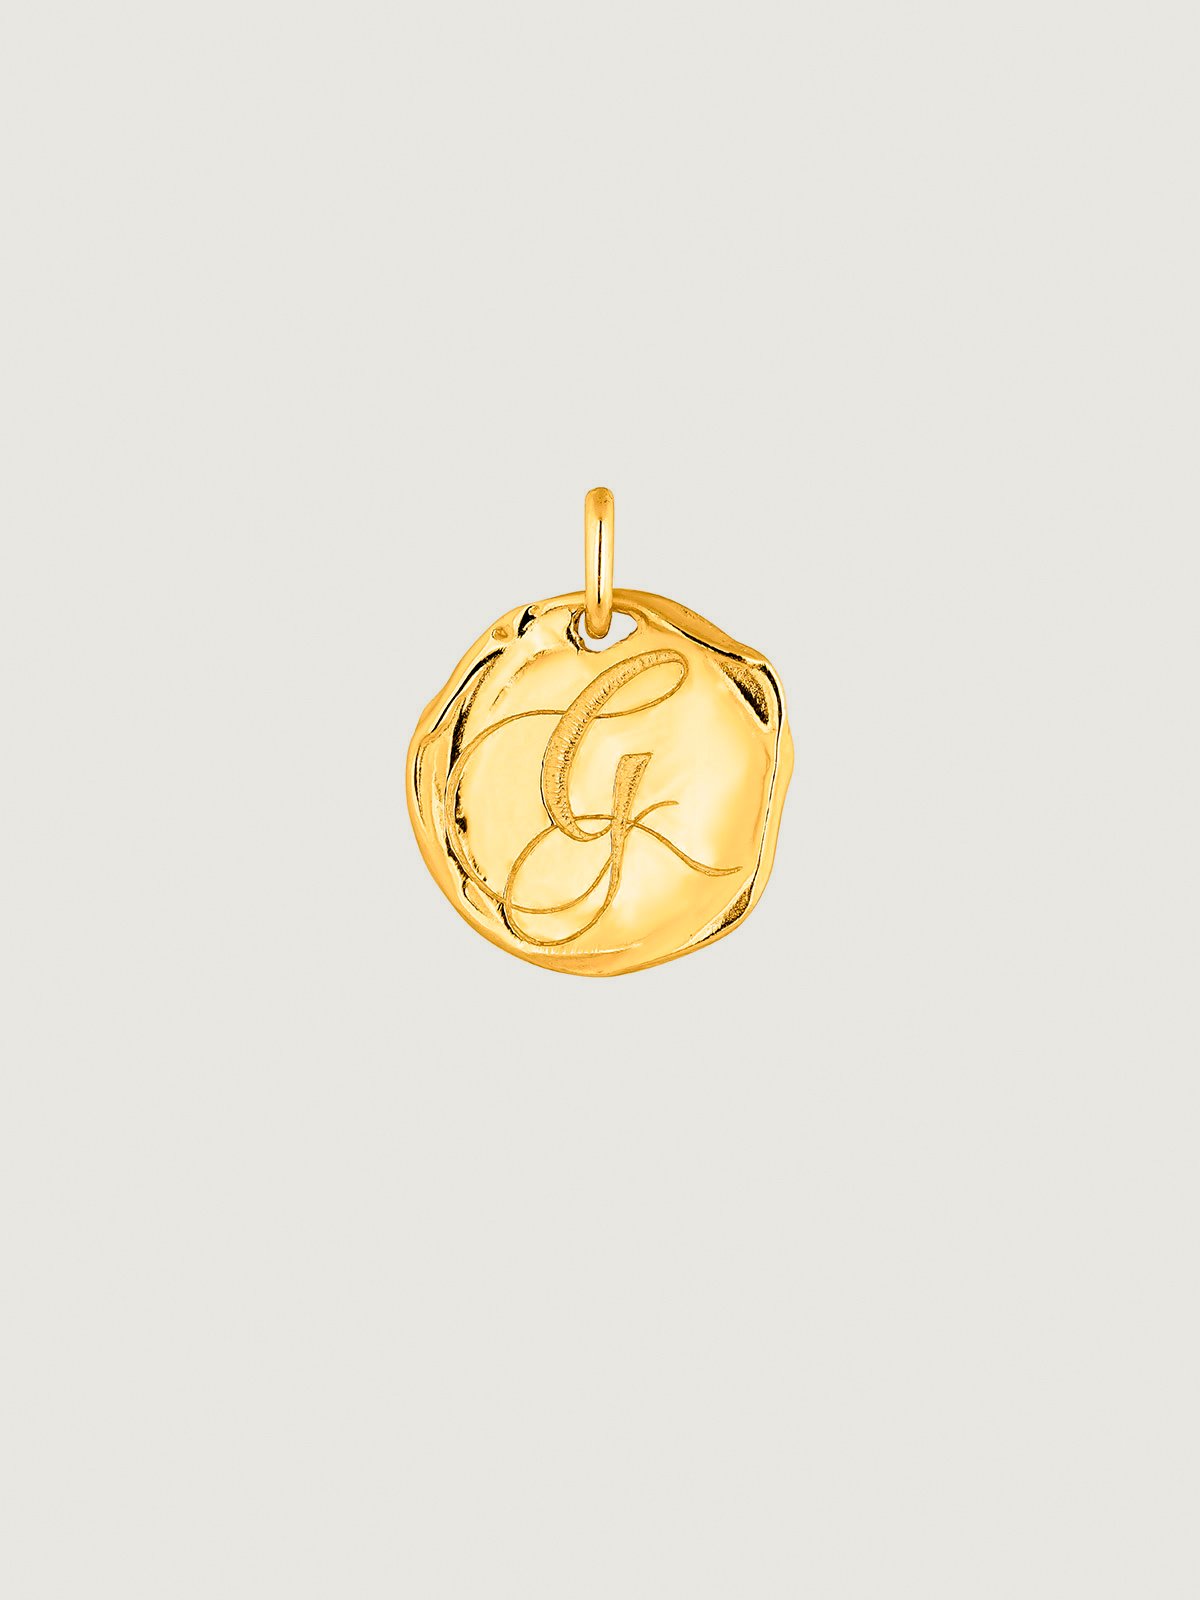 Handcrafted 925 silver charm dipped in 18K yellow gold with the initial G.